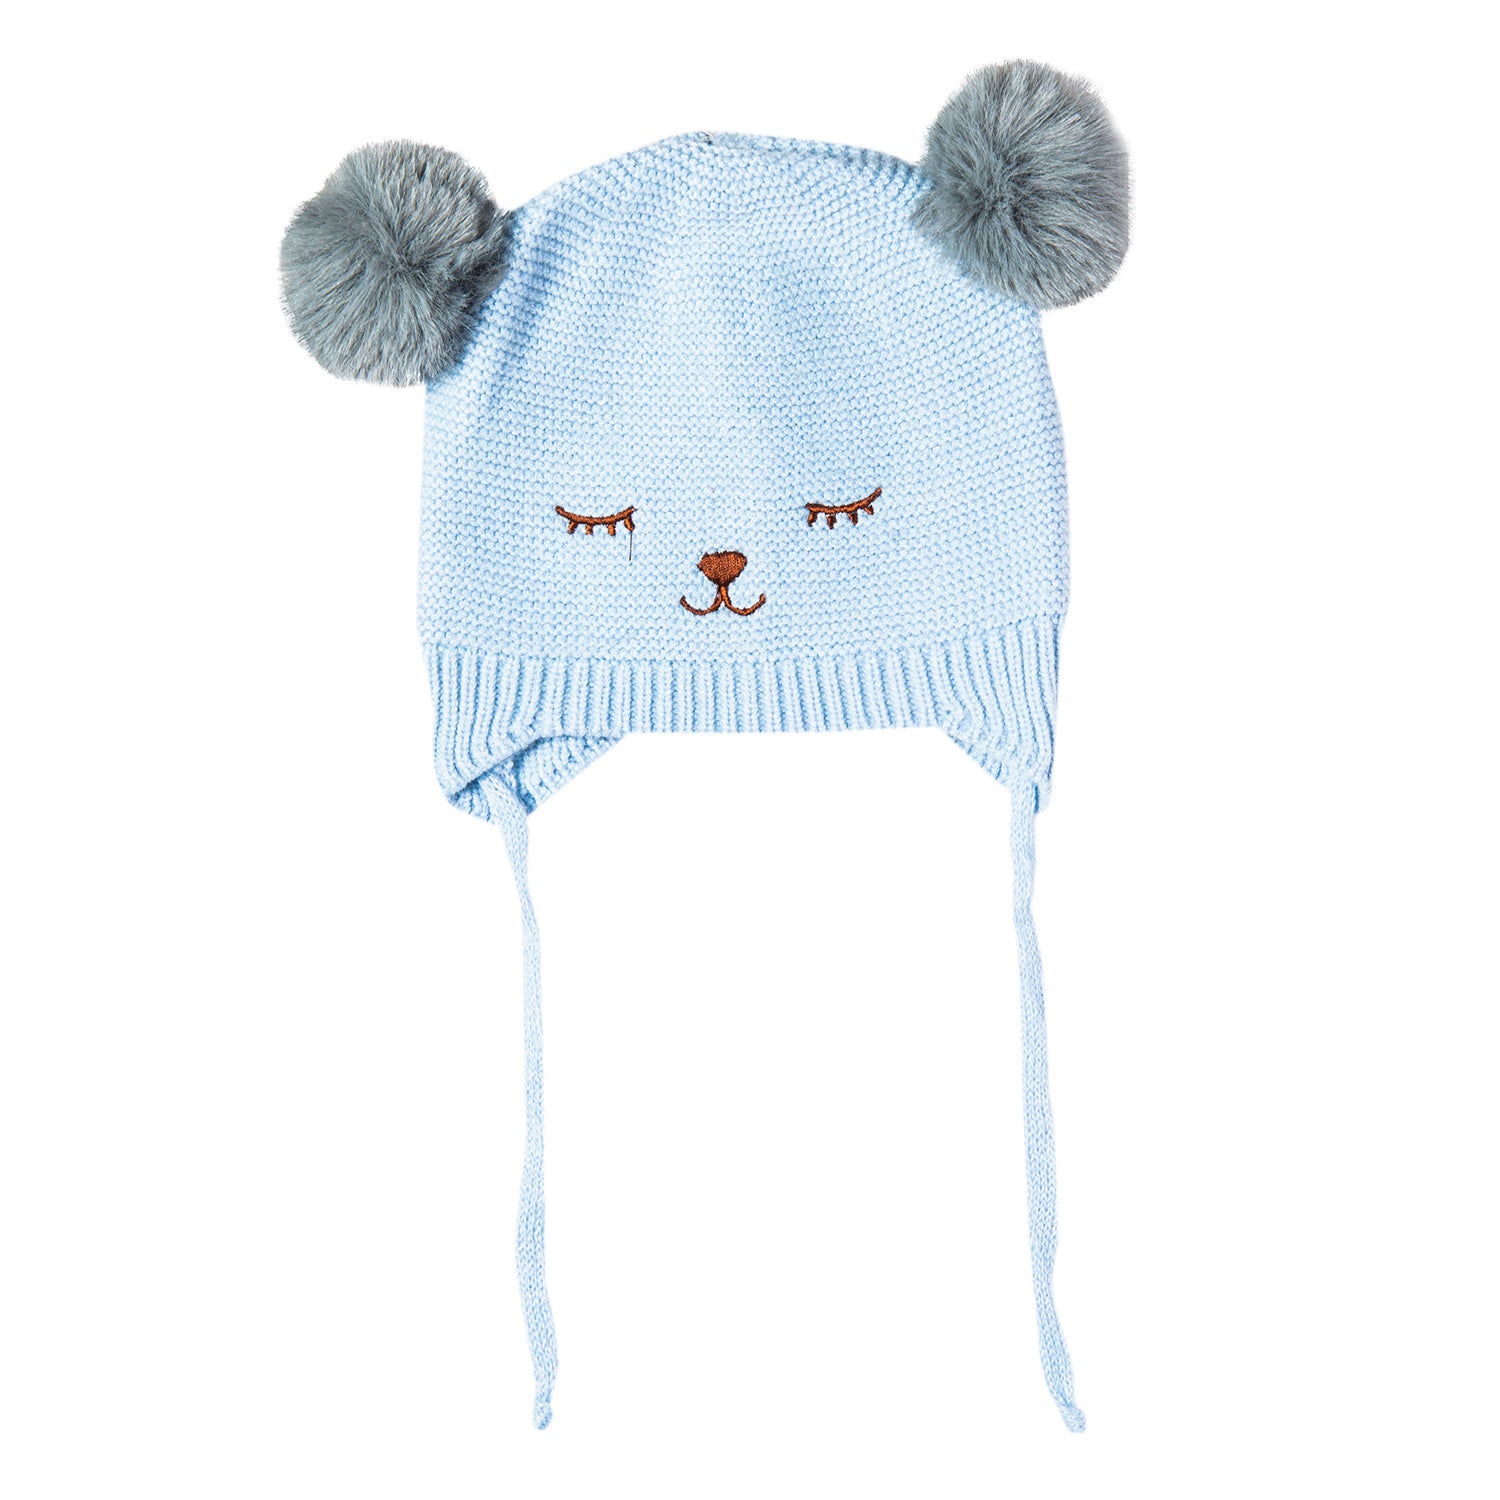 Knit Woollen Cap With Tie Knot For Ear Cover Sleeping Pom Pom Blue - Baby Moo